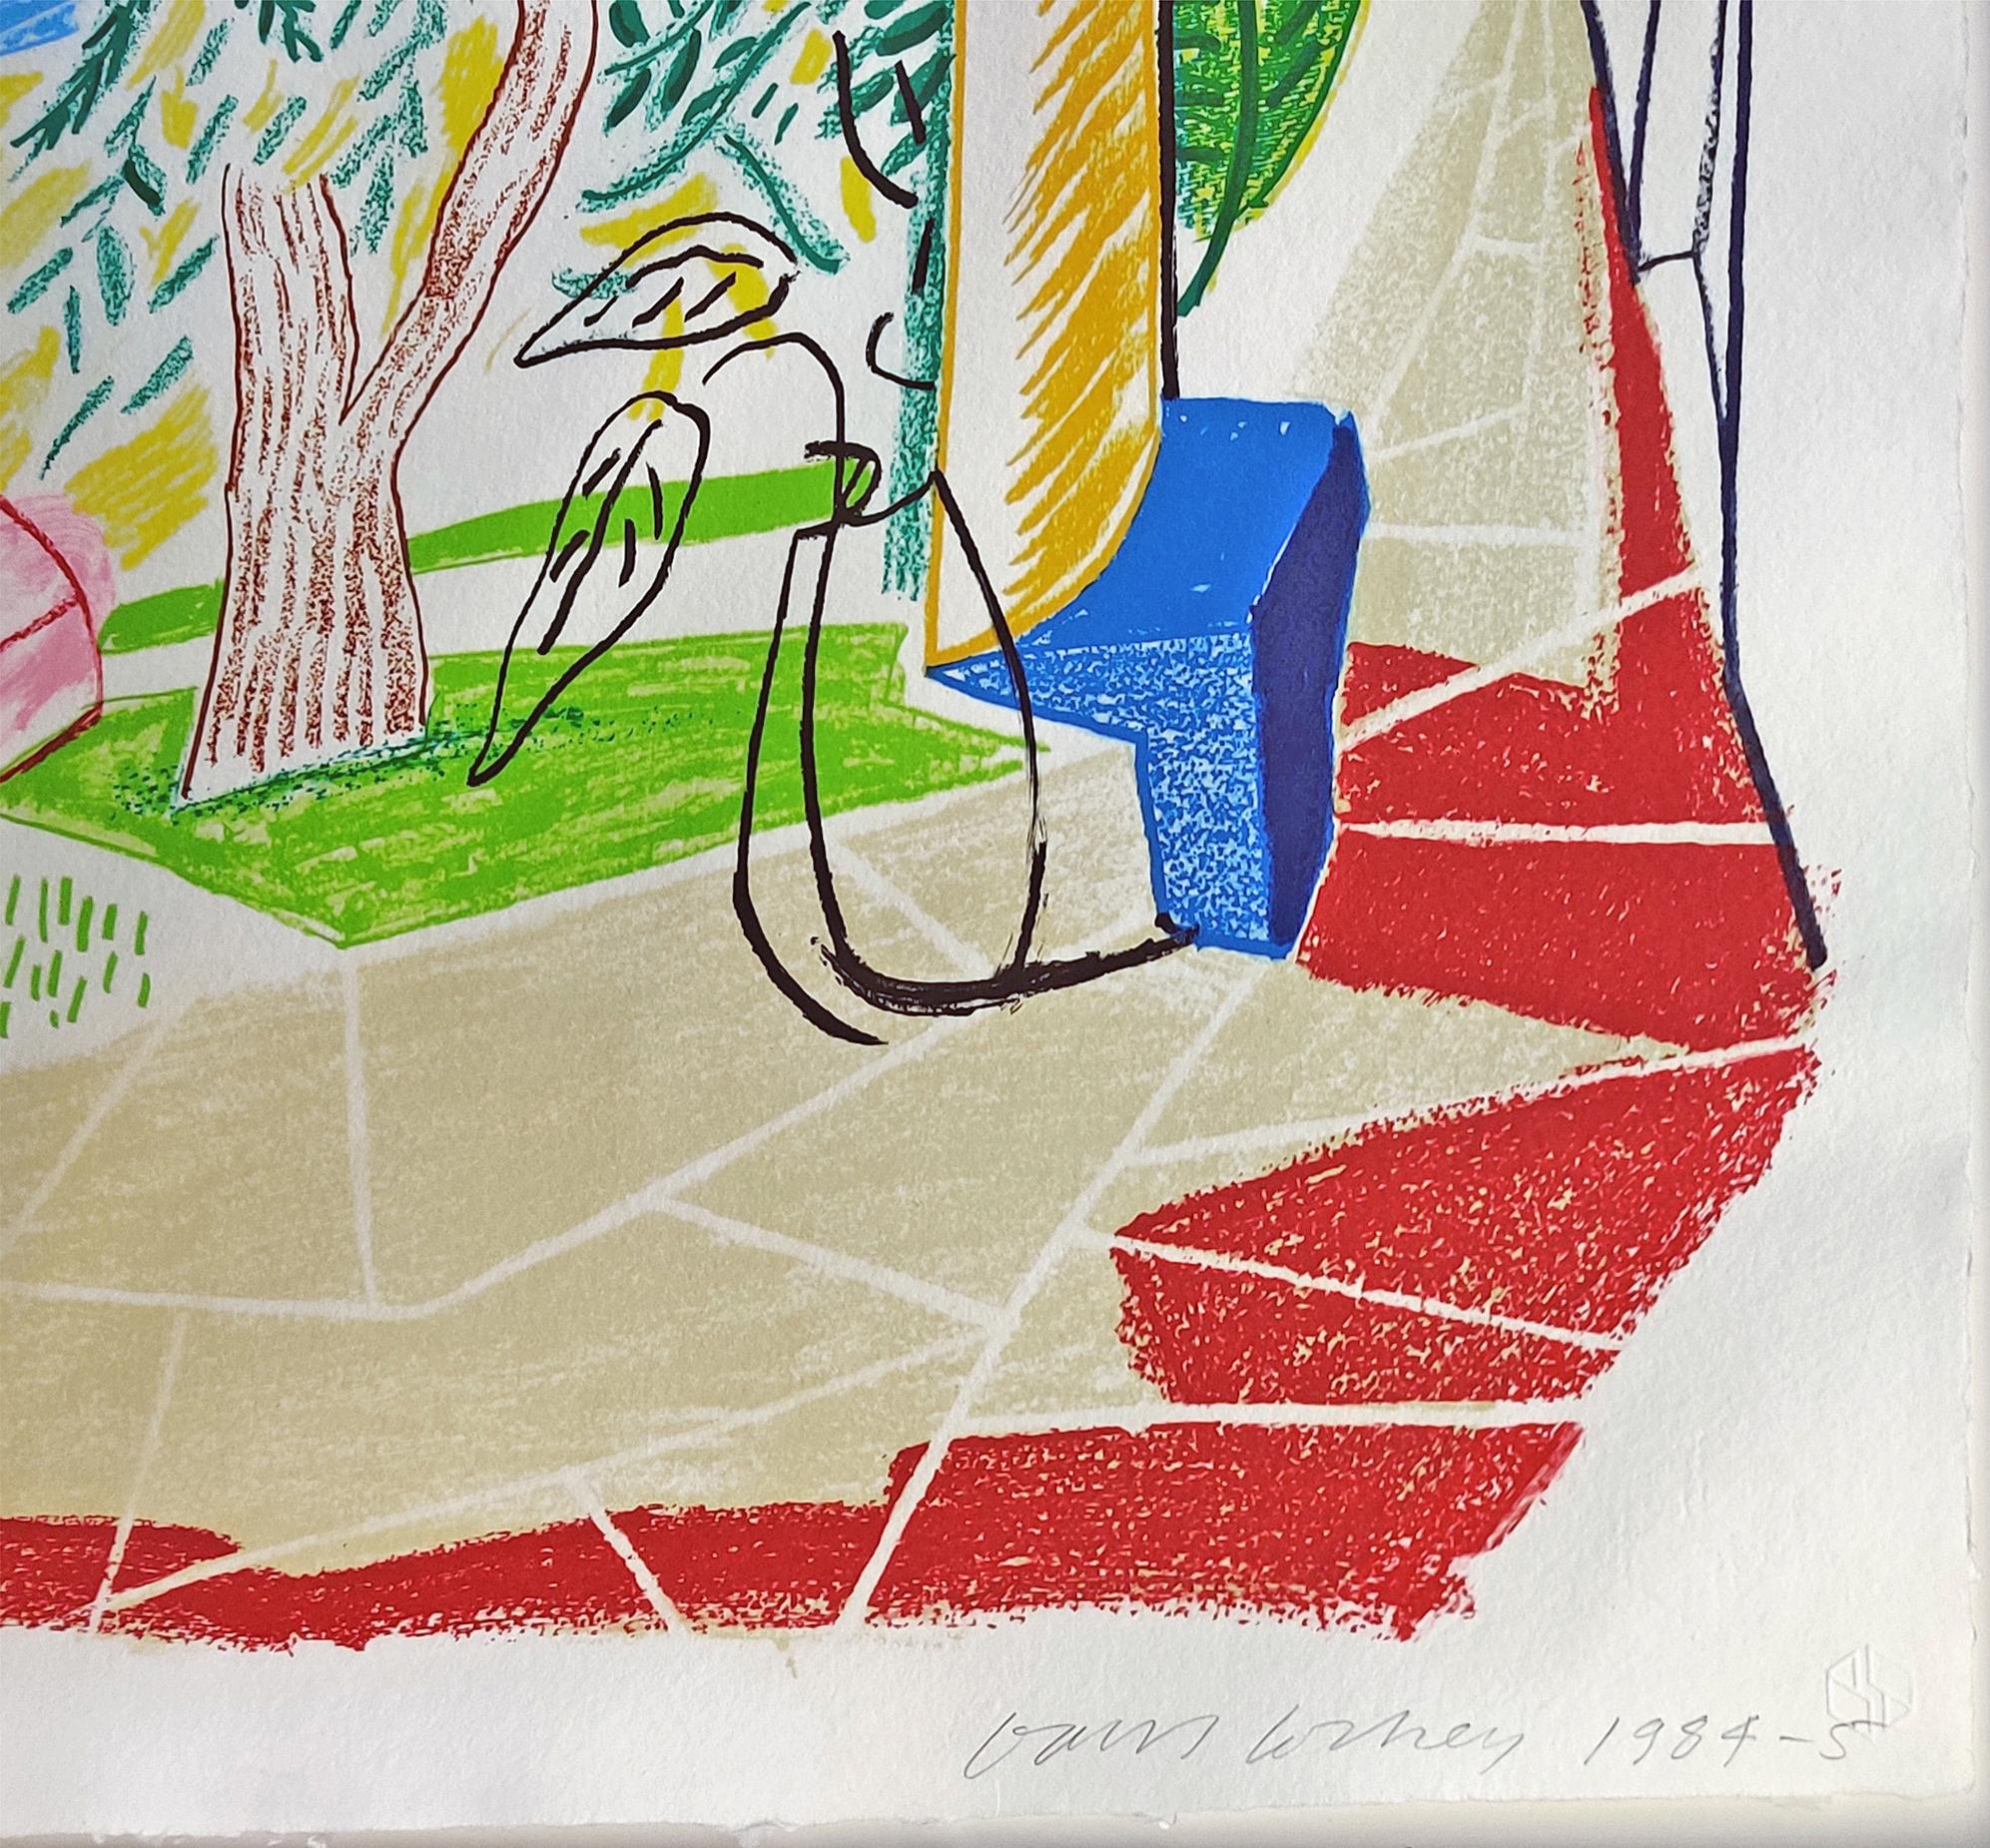 Views of Hotel Well I, from Moving Focus series - Print by David Hockney